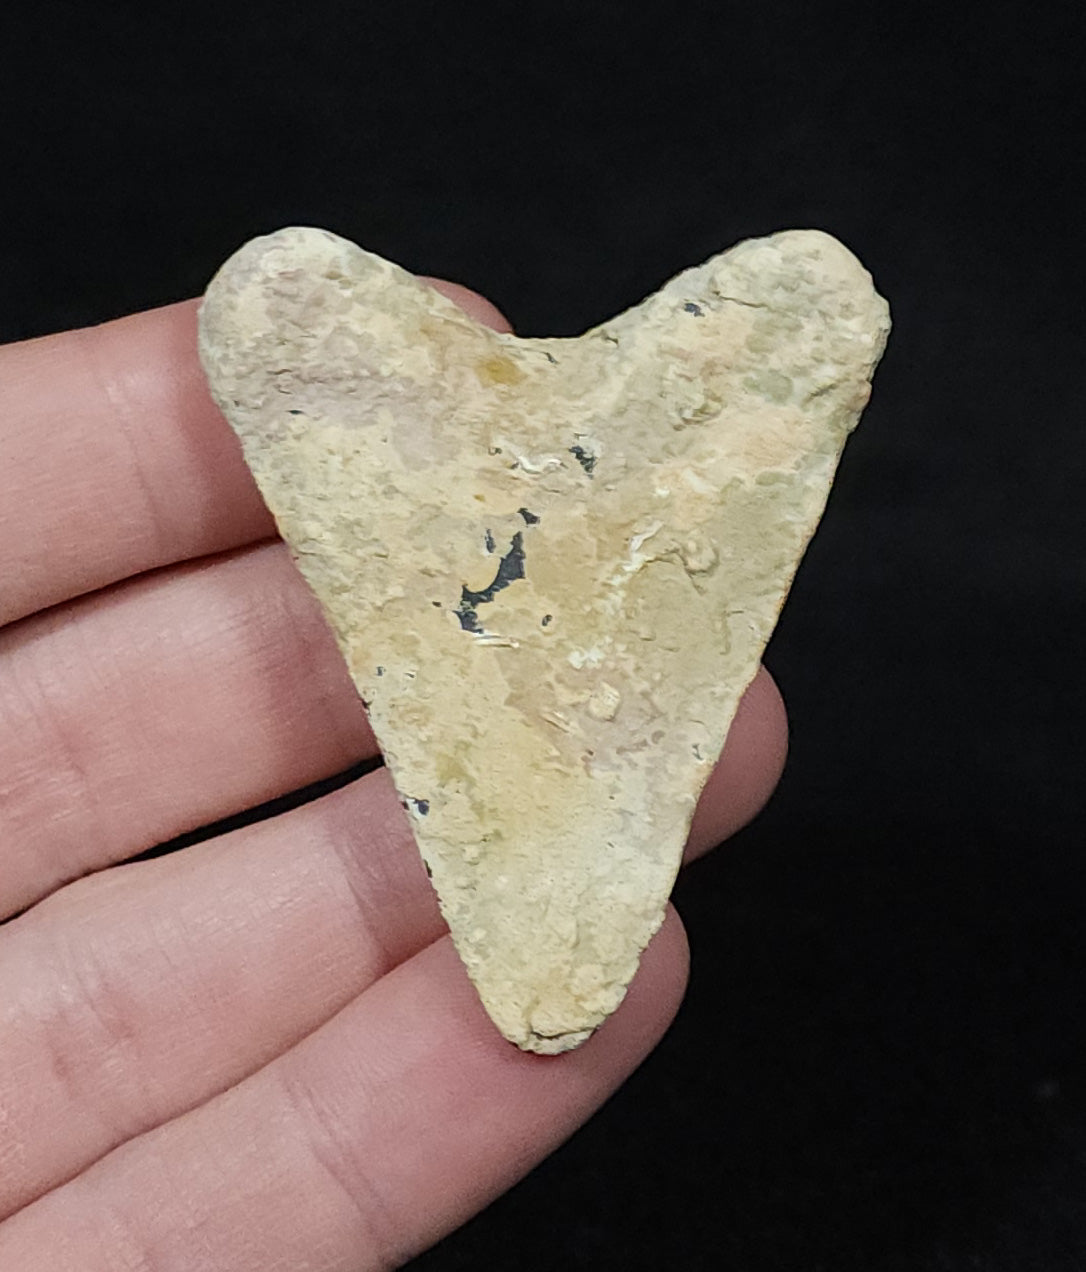 Encrusted 2.23" Fossil Megalodon Tooth - Venice, FL